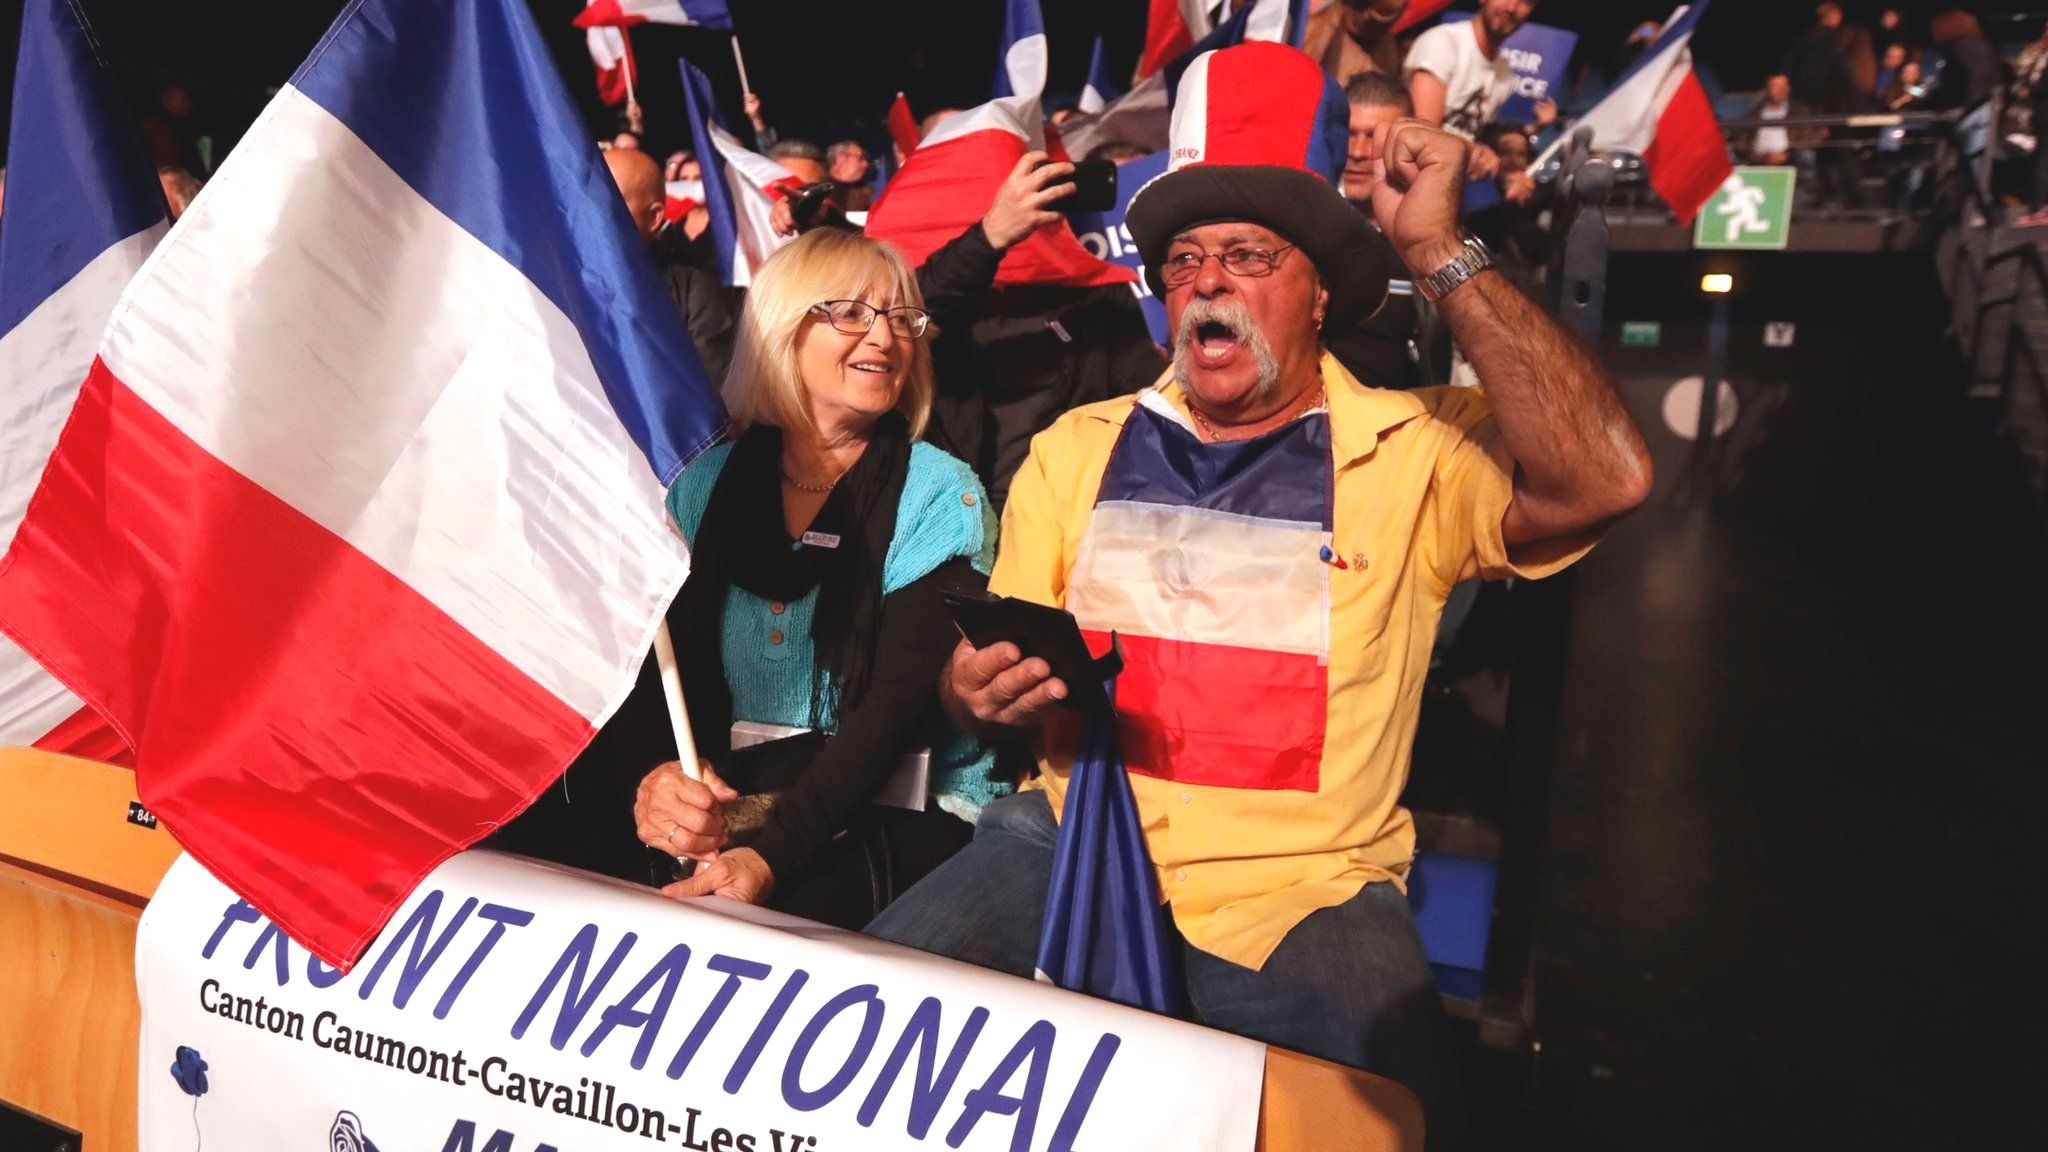 Supporters of Marine Le Pen, French National Front (FN) presidential candidate, attend a campaign rally in Nice, France, on 27 April 2017